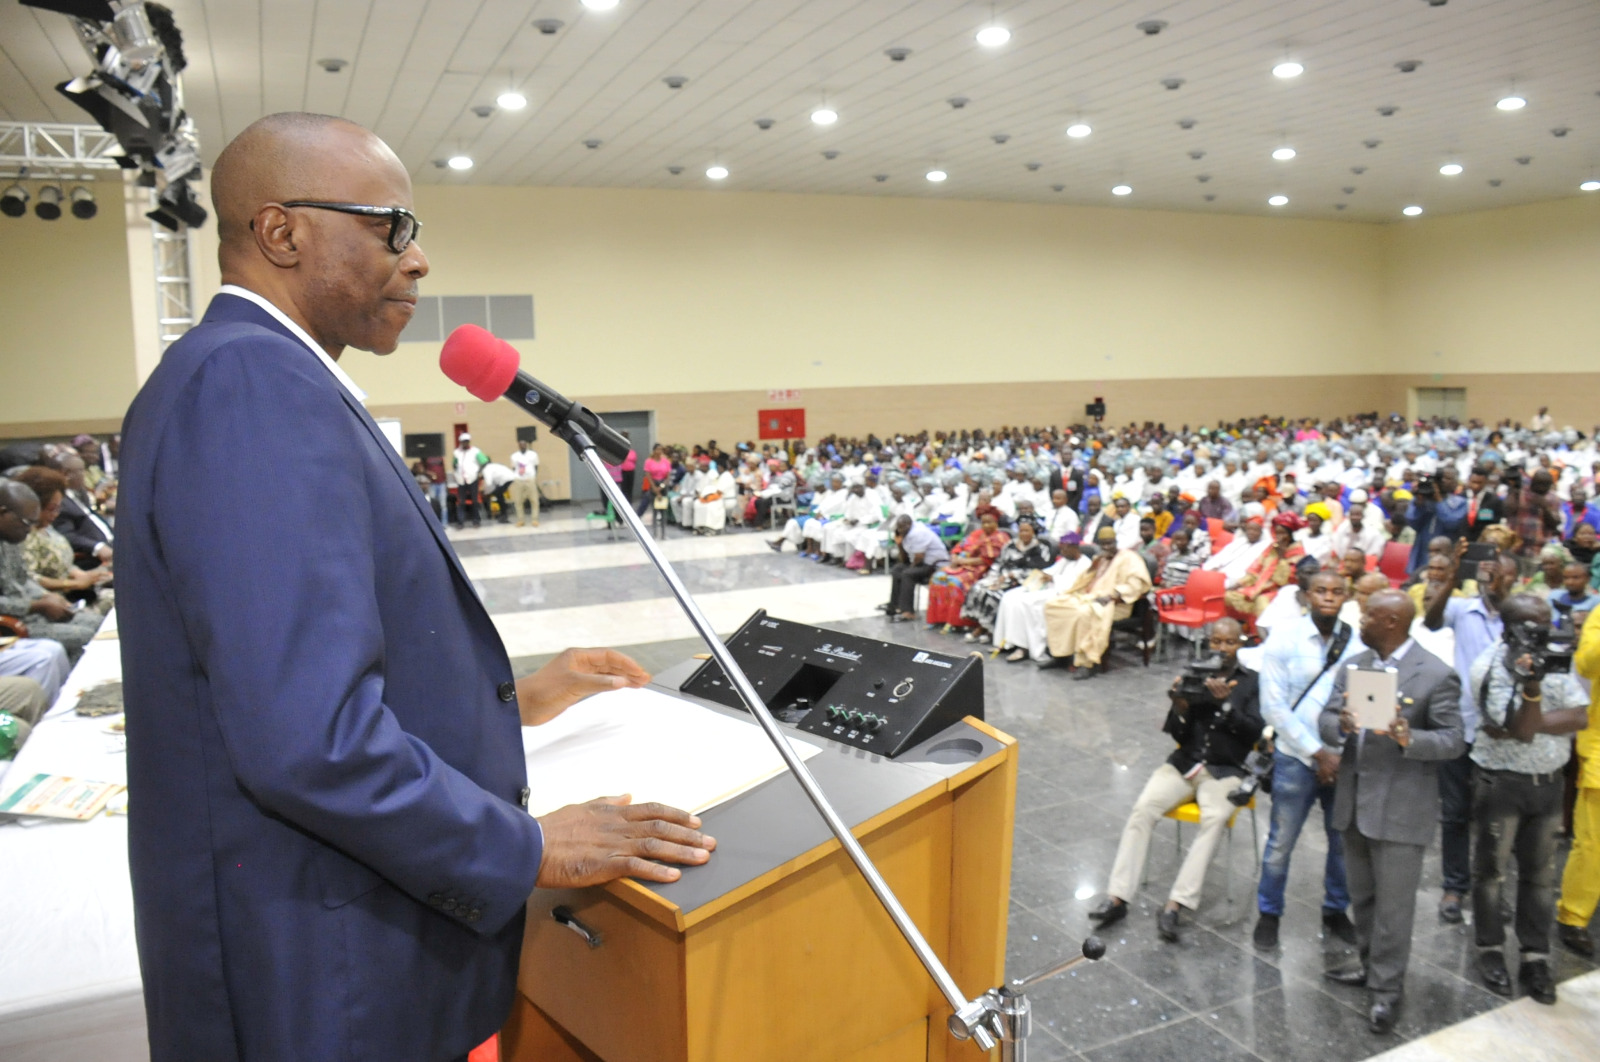 Ondo State Governor, Dr. Olusegun Mimiko addresses the audience at the disbursement of the CBN/Ondo Micro, Small and Medium Enterprises Development Fund (MSMEDF), at the International events center – The Dome, in Akure, on Tuesday, September 7, 2016